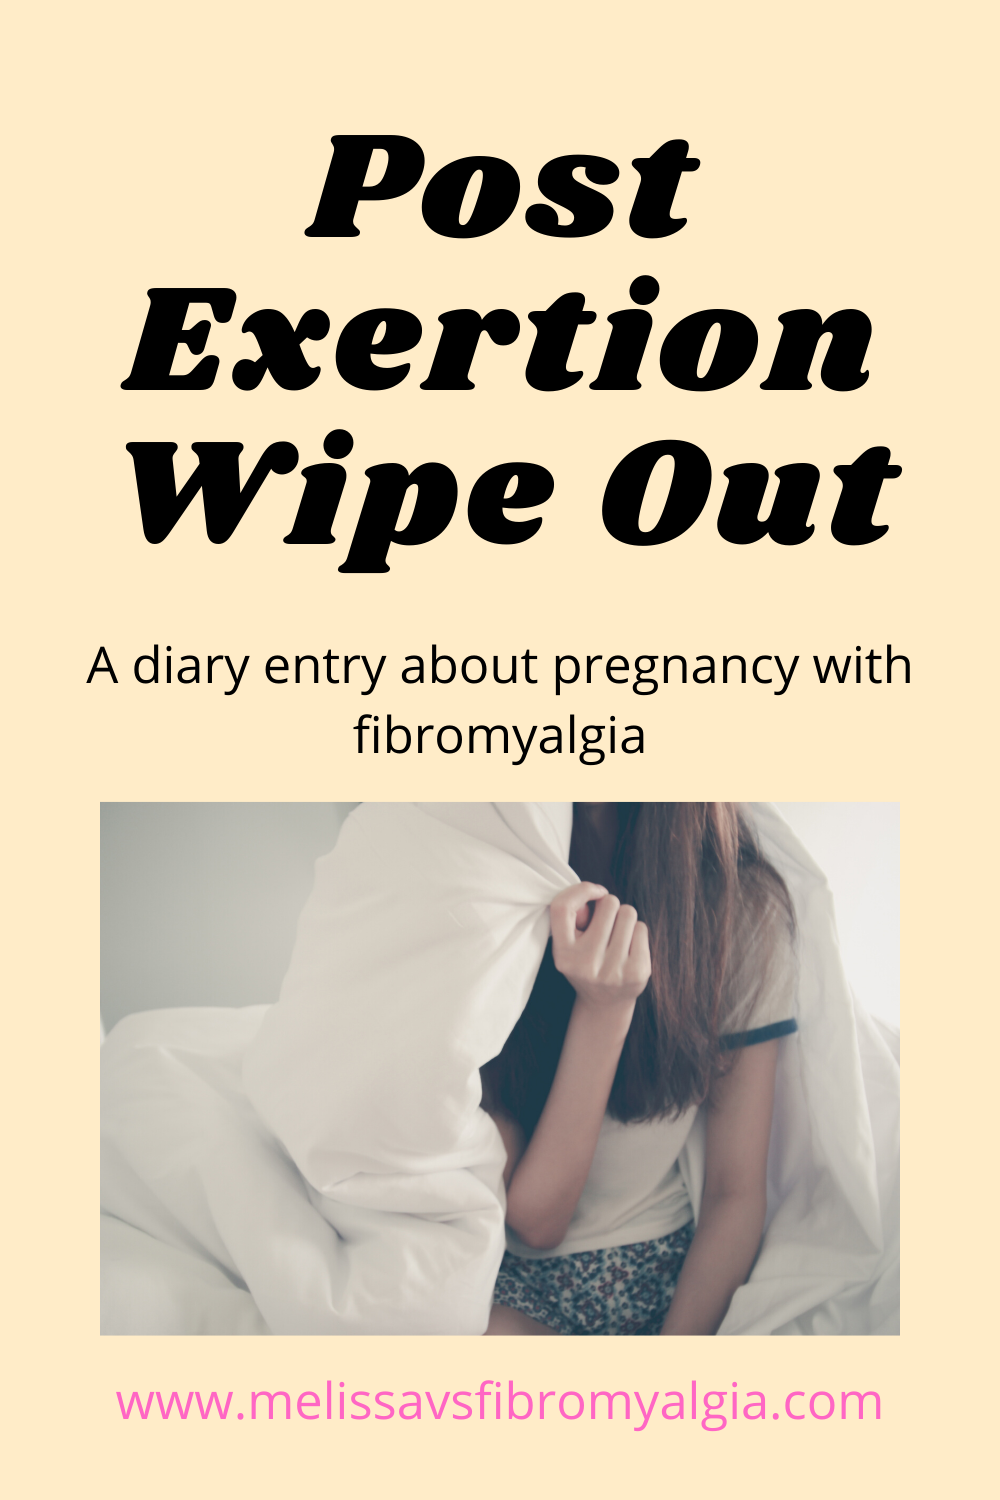 post exertion wipe out: pregnancy and fibromyalgia